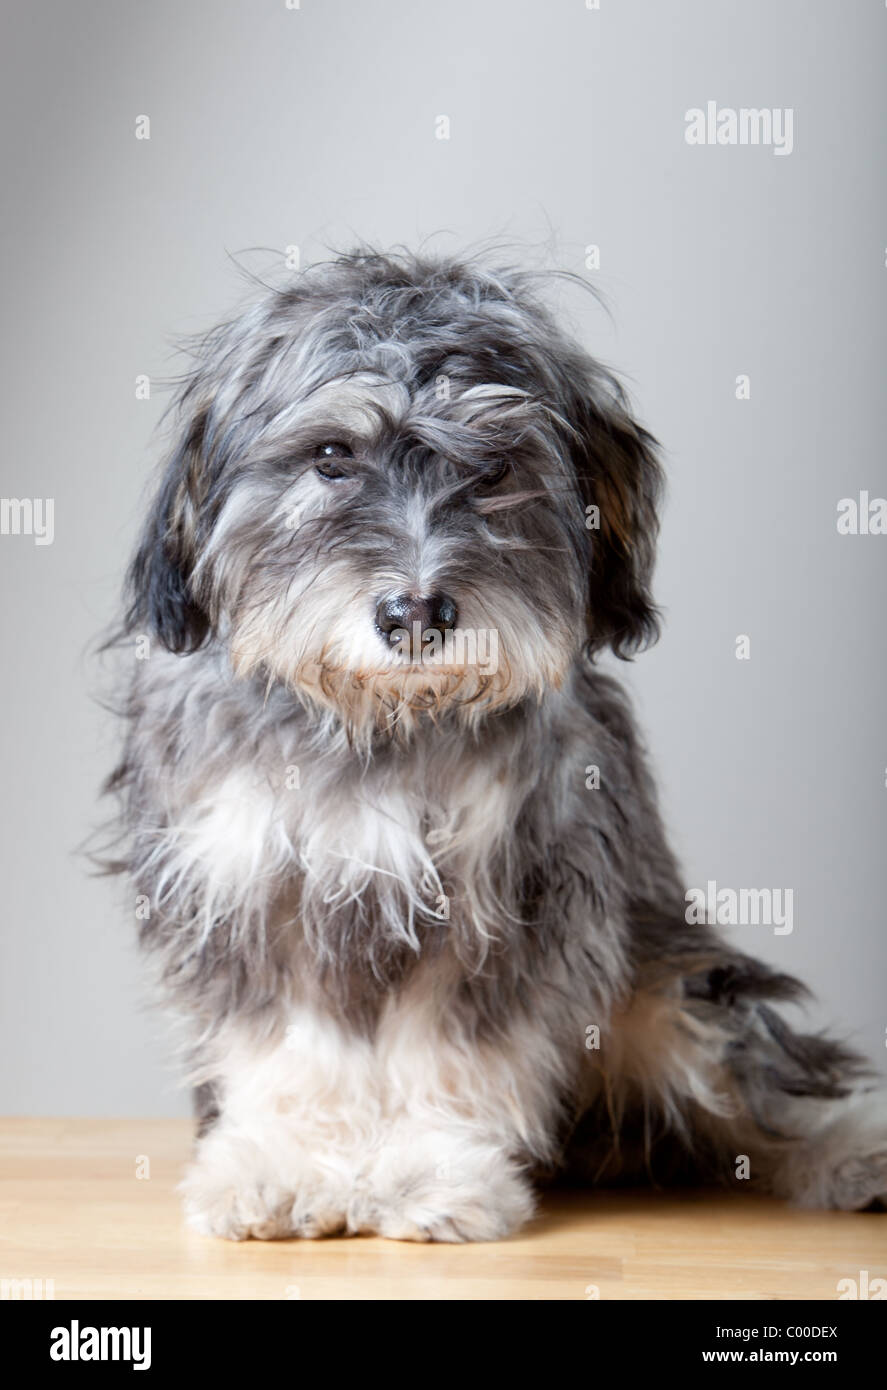 A studio portrait of a gray shaggy dog on a light colored, wooden table Stock Photo